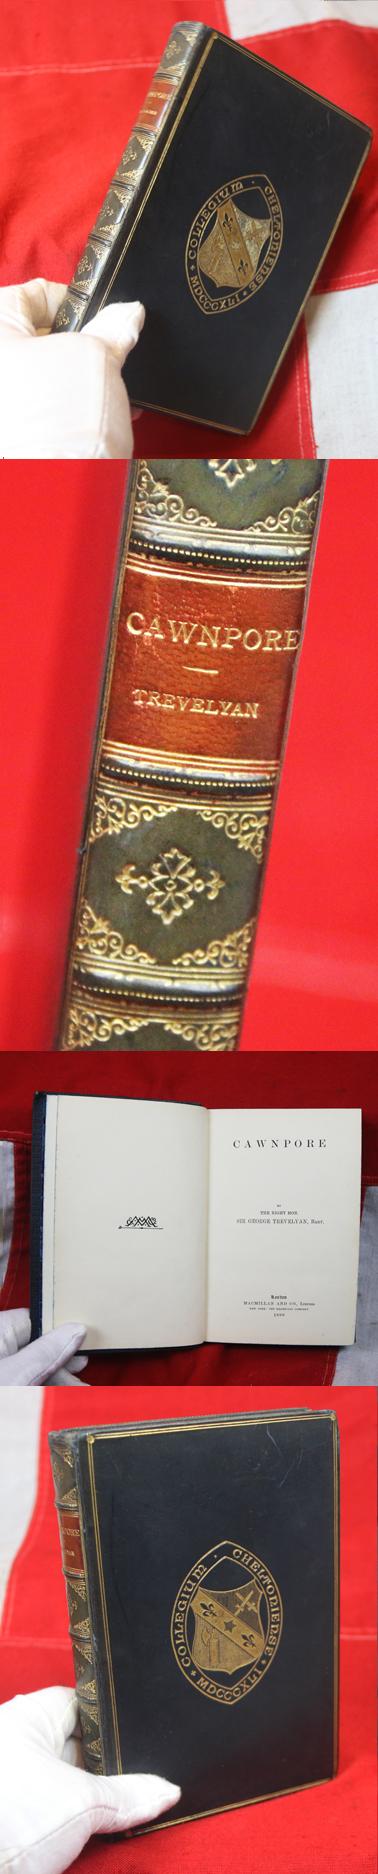 A Beautiful Full leather Bound,  'Cawnpore' by George Otto Trevelyan Published by Macmillan and Co., 1899